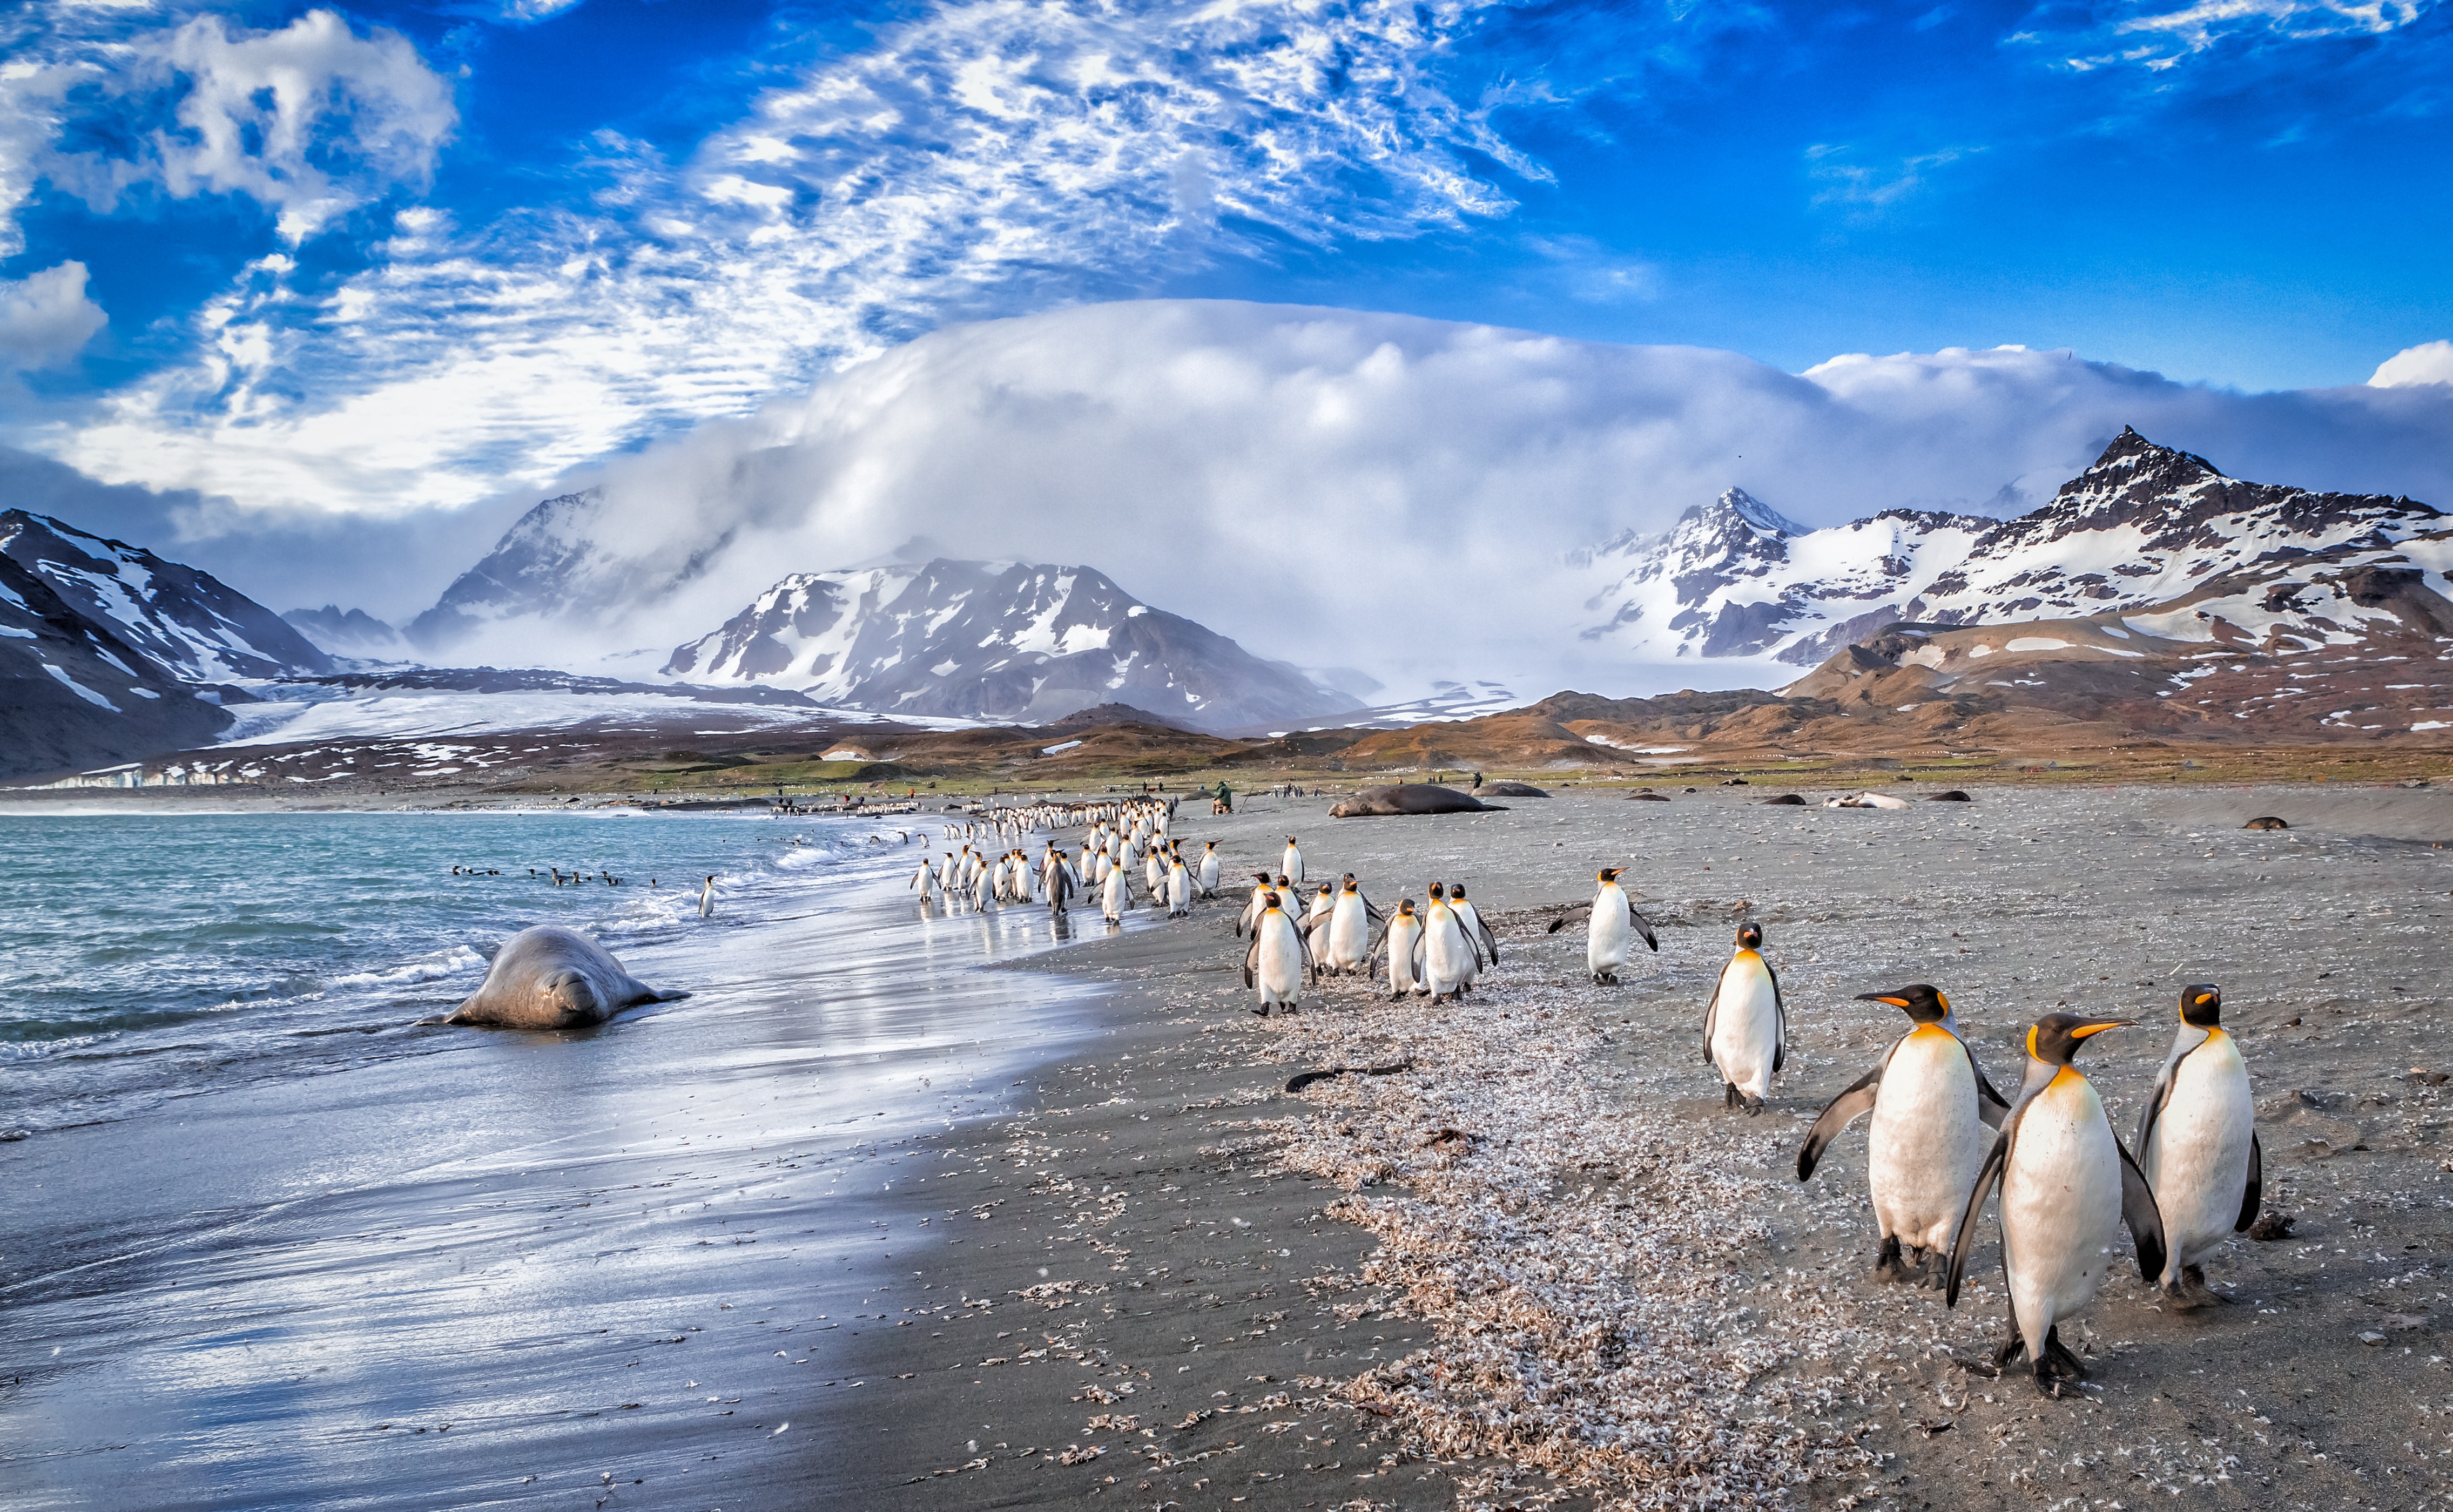 St. Andrews Bay | South Georgia | King penguins | South America Travel